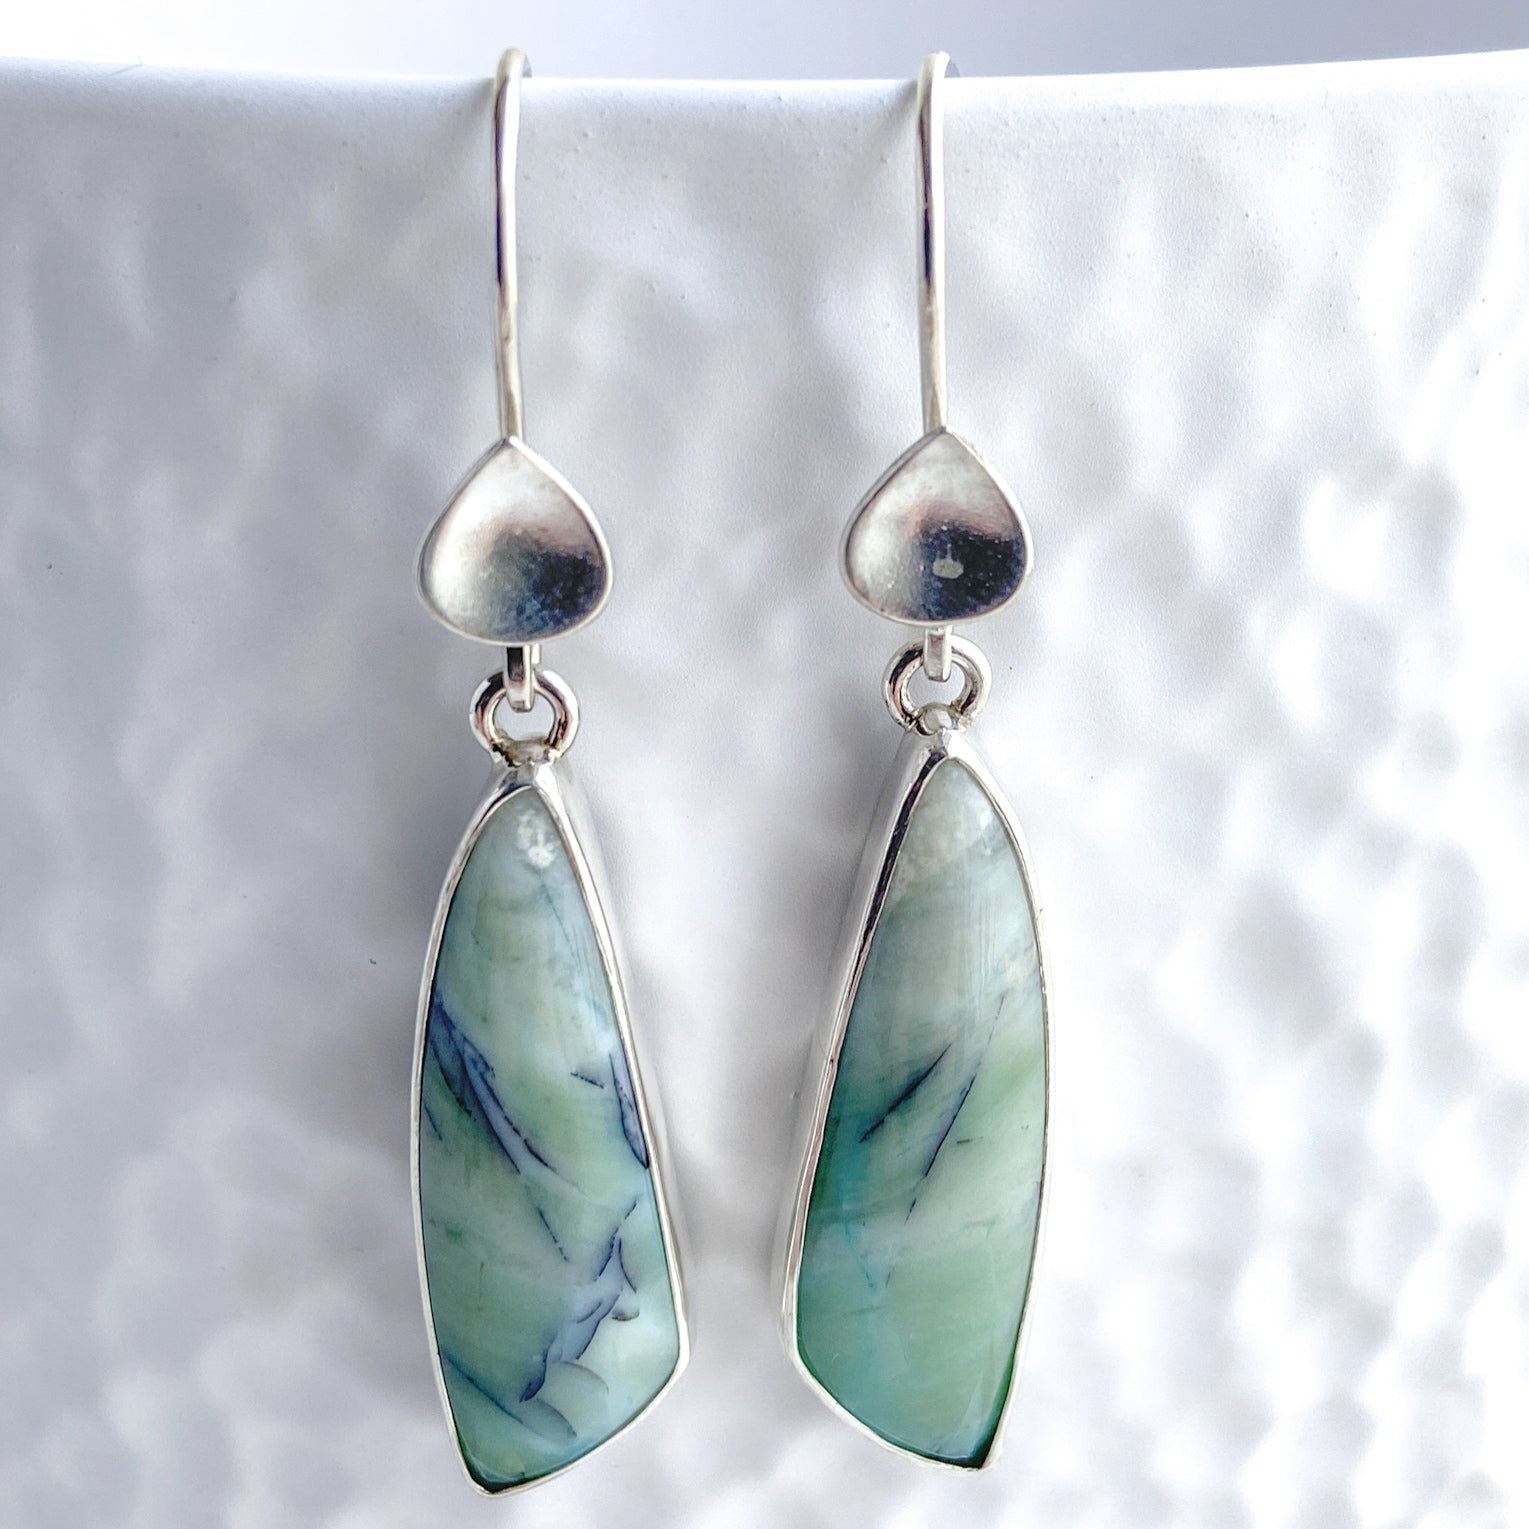 Close-up view of opal wood gemstone earrings with a silver waterdrop embellishment displayed on a white textured background.